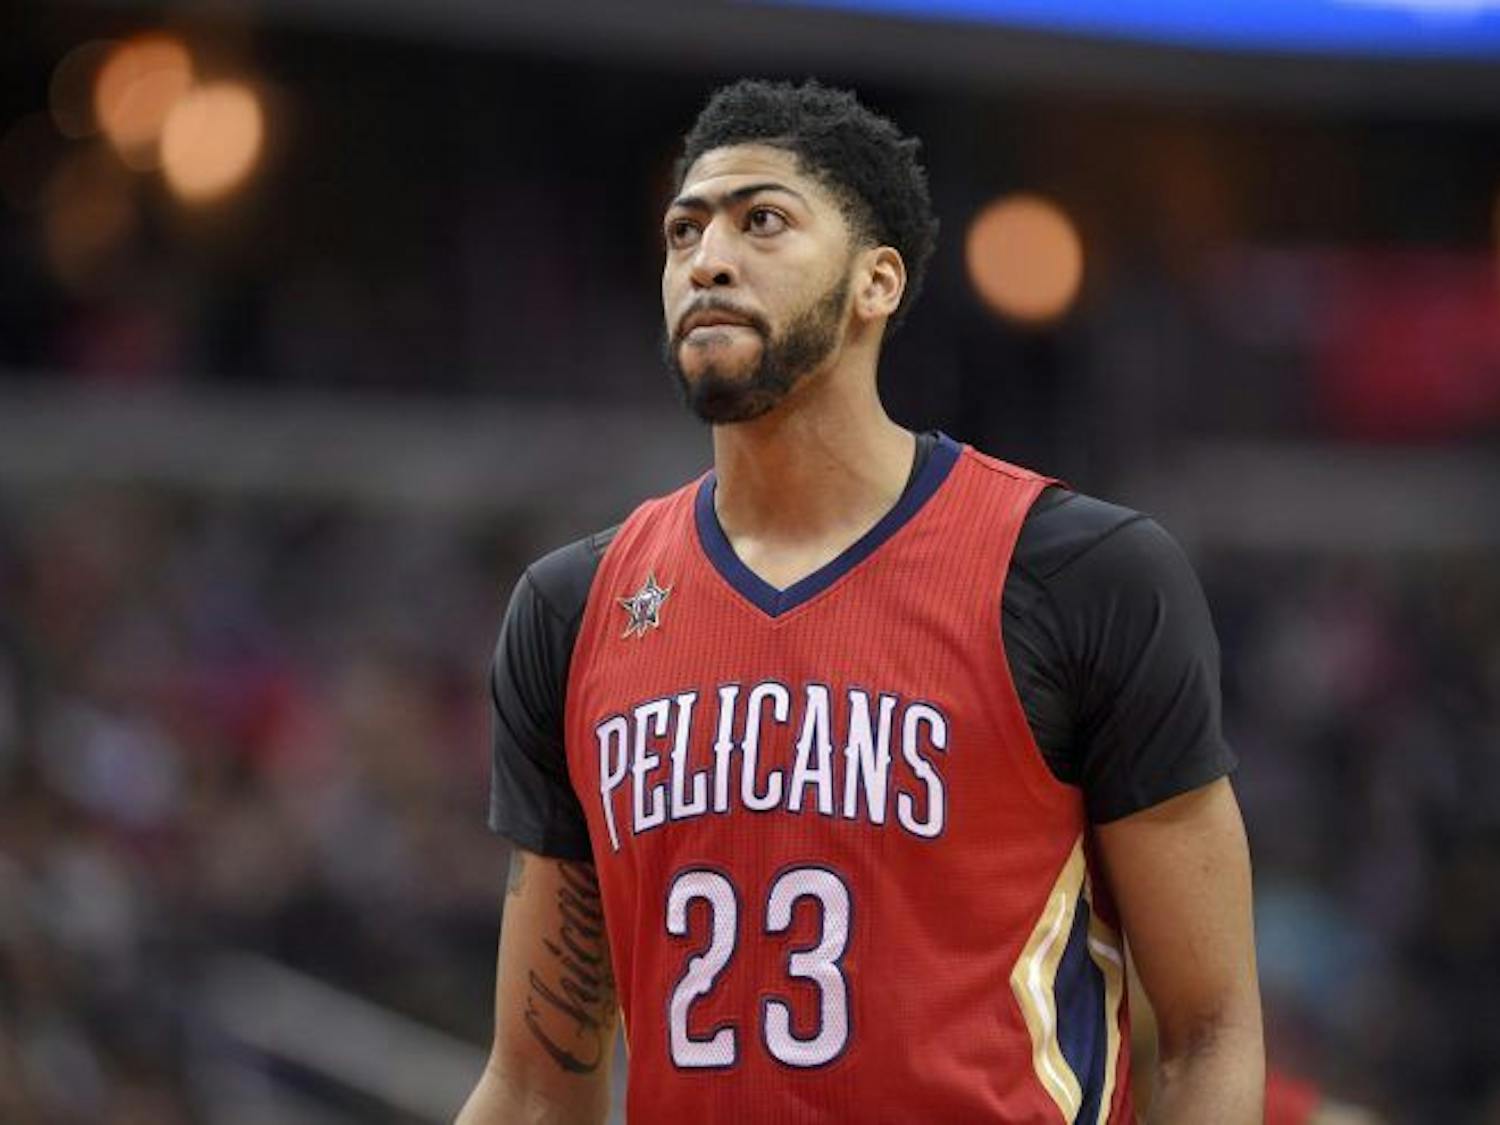 Pelicans F/C Anthony Davis was nearly the only unanimous pick by the alligatorSports NBA Awards Selection Panel. He's predicted to be the NBA Defensive Player of the Year by three-fourths of the panel.